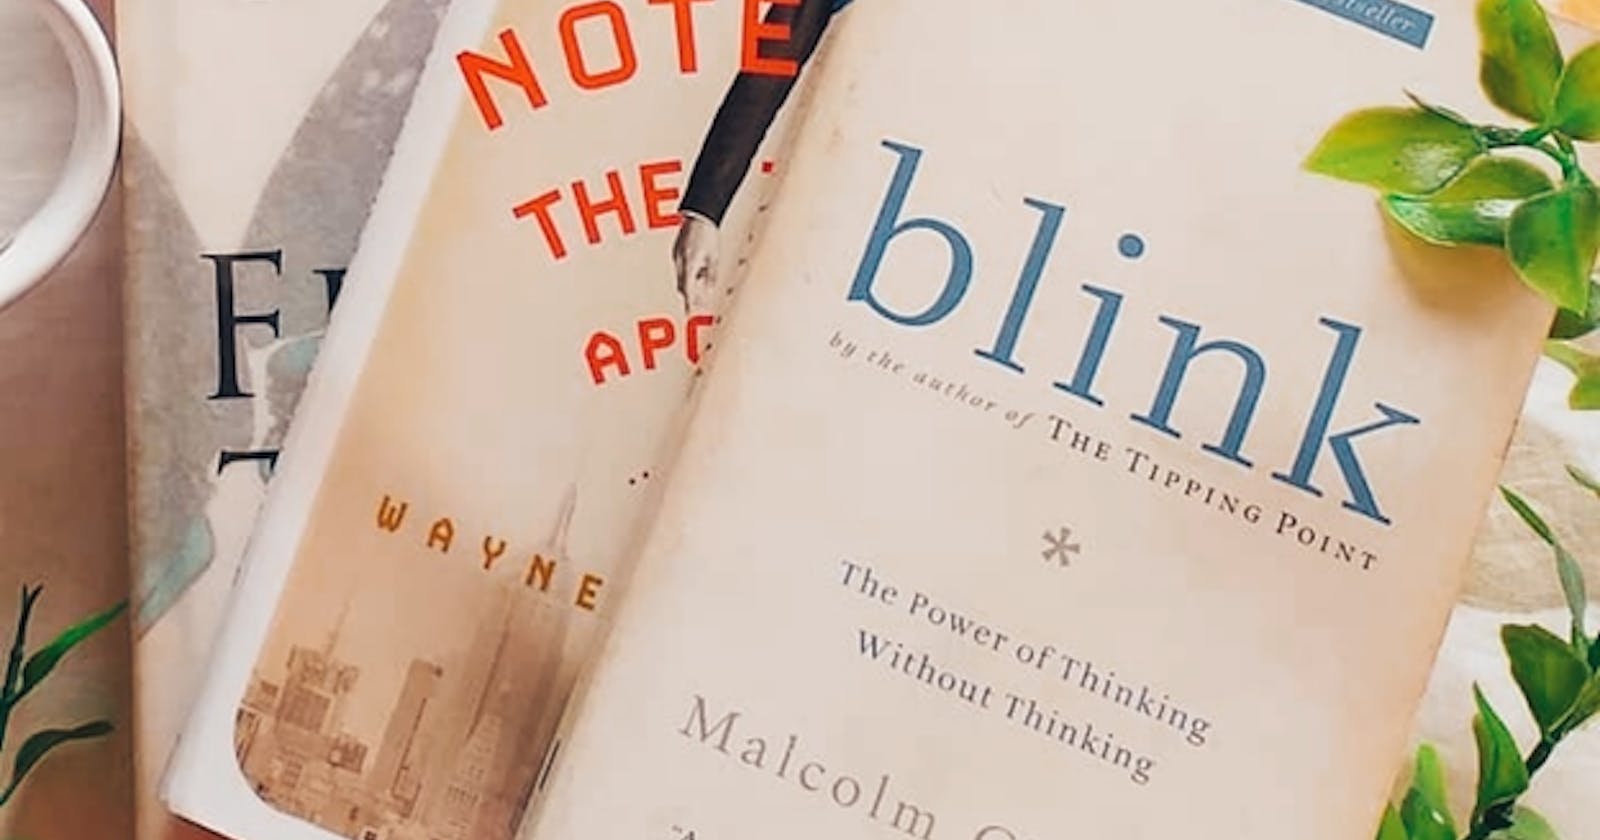 8 Top Lessons From the Book “Blink”: